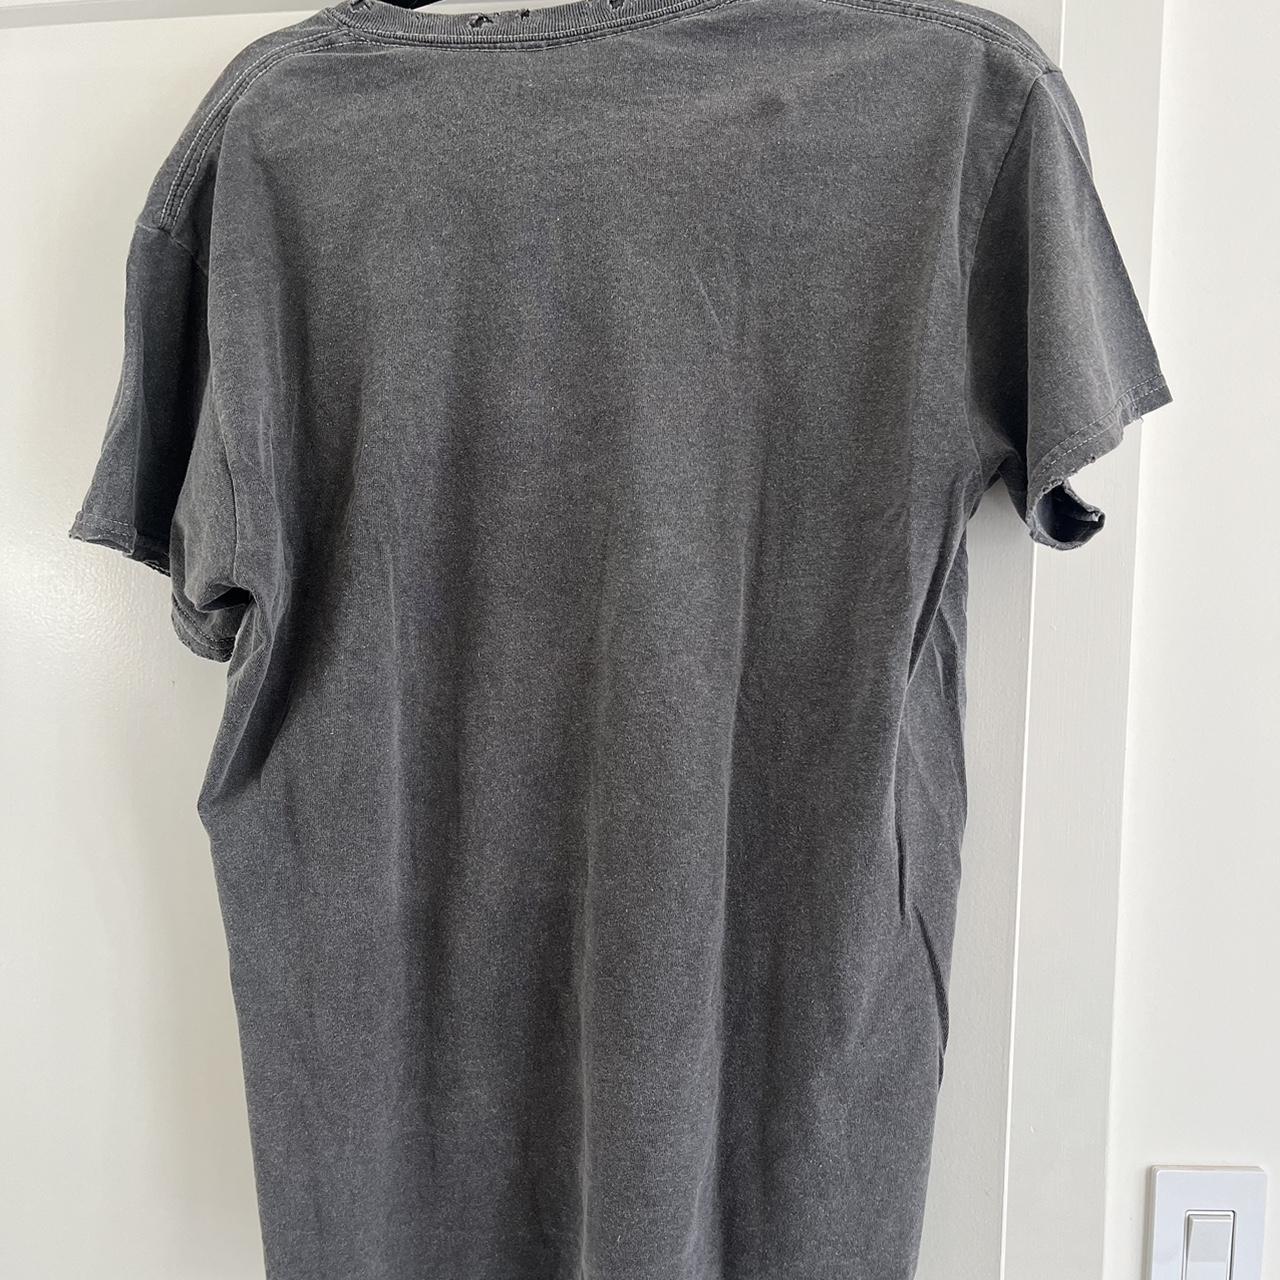 Urban Outfitters Men's Grey T-shirt (2)